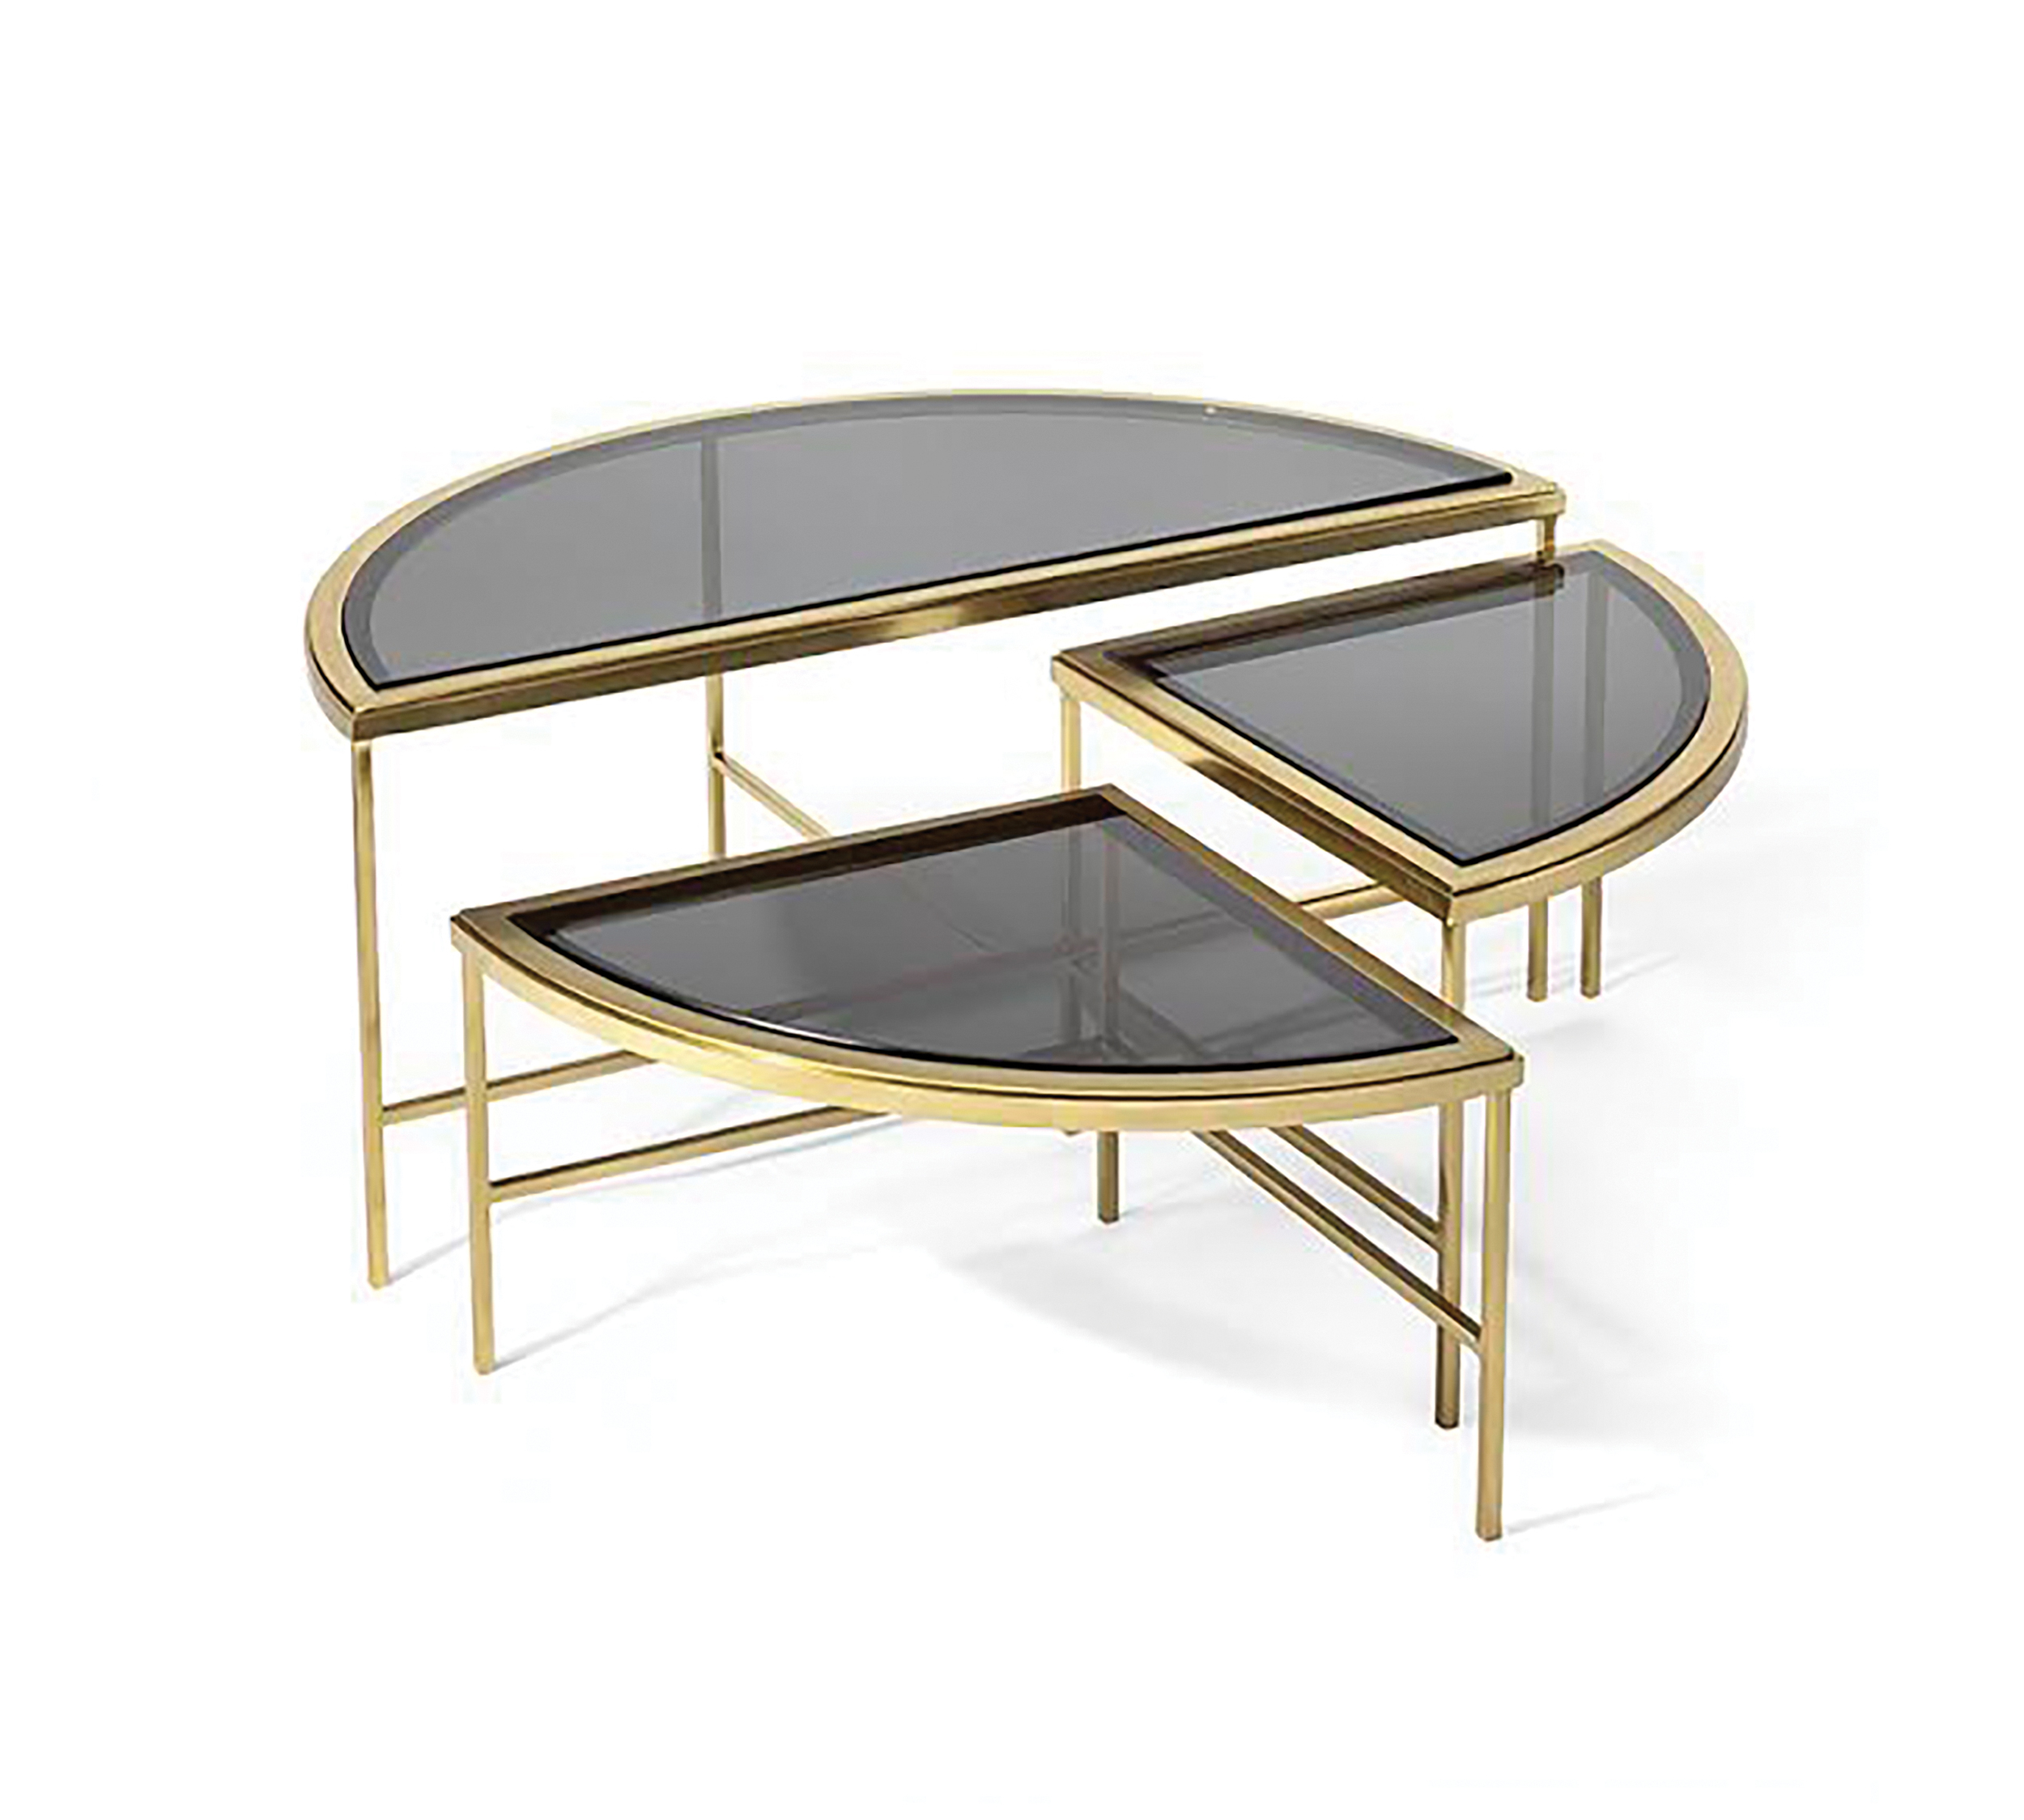  Lorin Marsh Puzzle Cocktail Table 